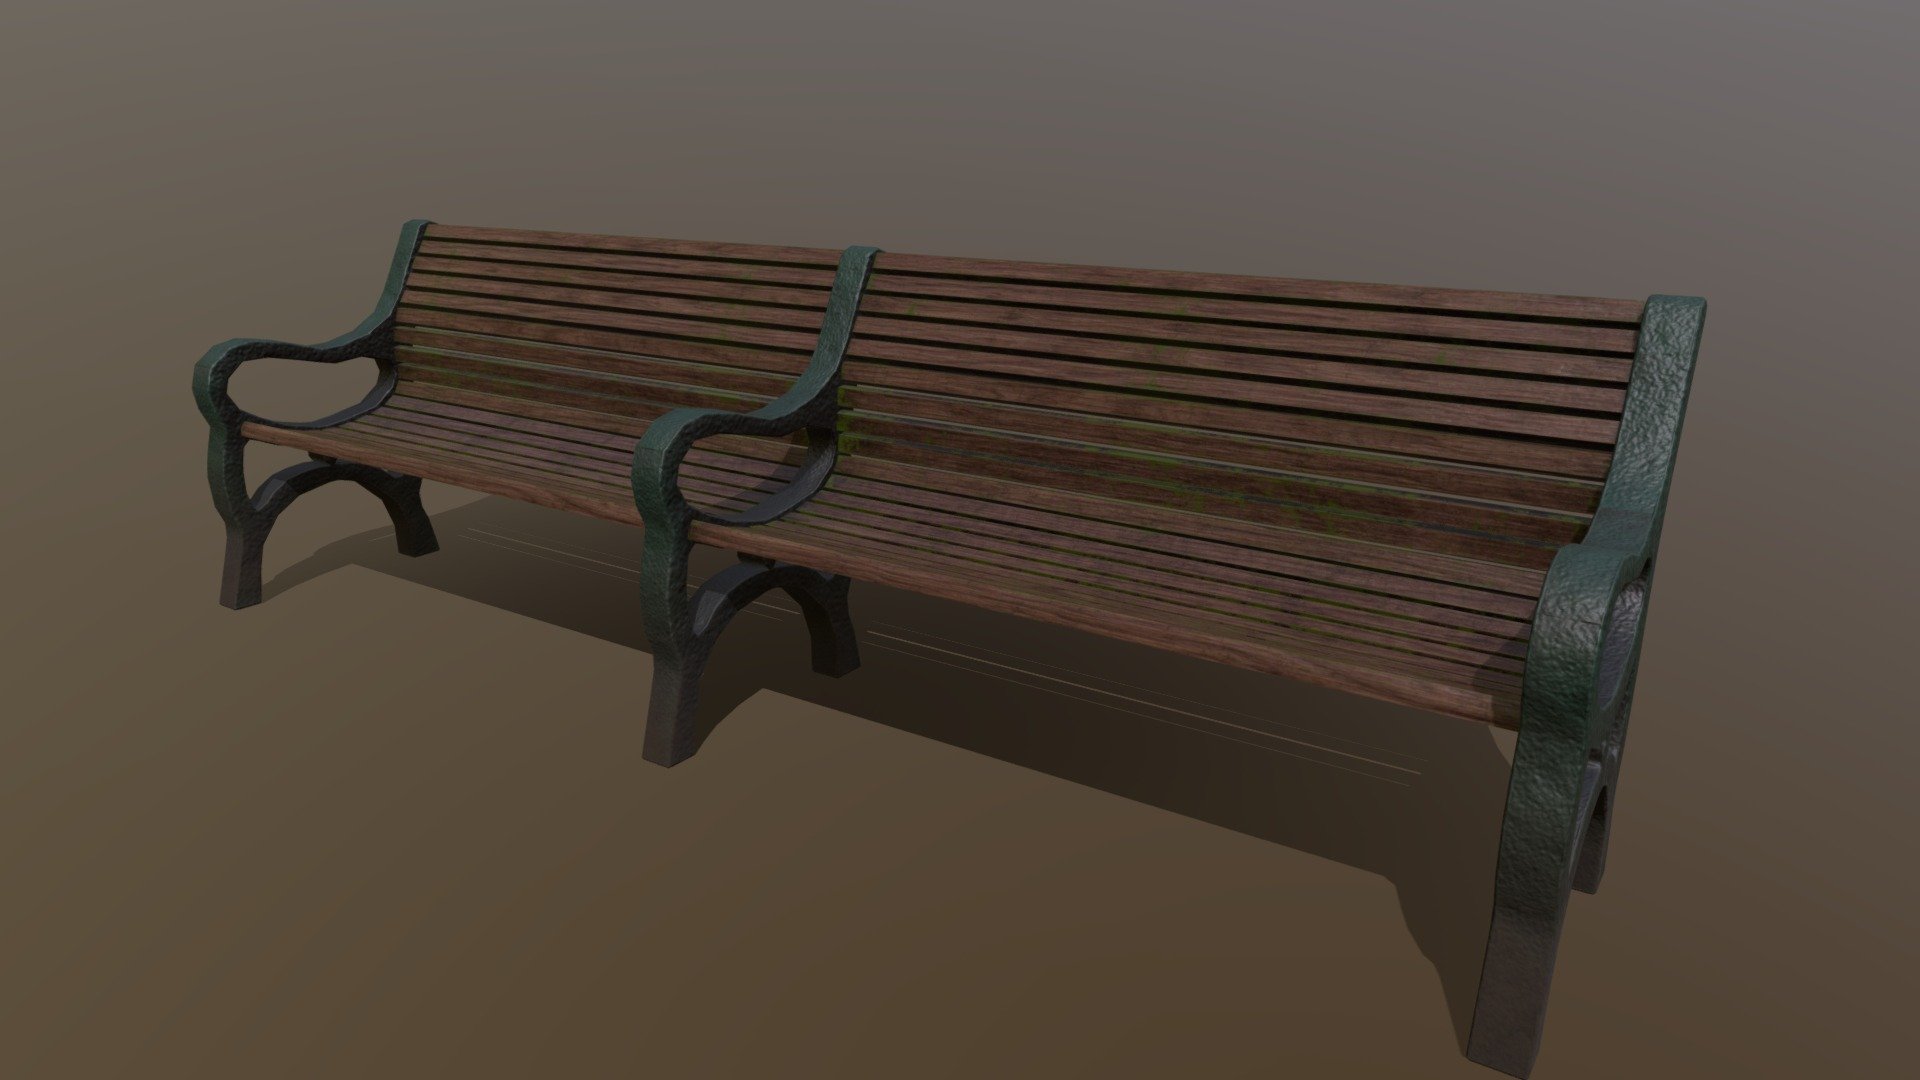 This park bench was created using Maya and Substance Painter.
I created this asset for an autumn park environmnet 3d model